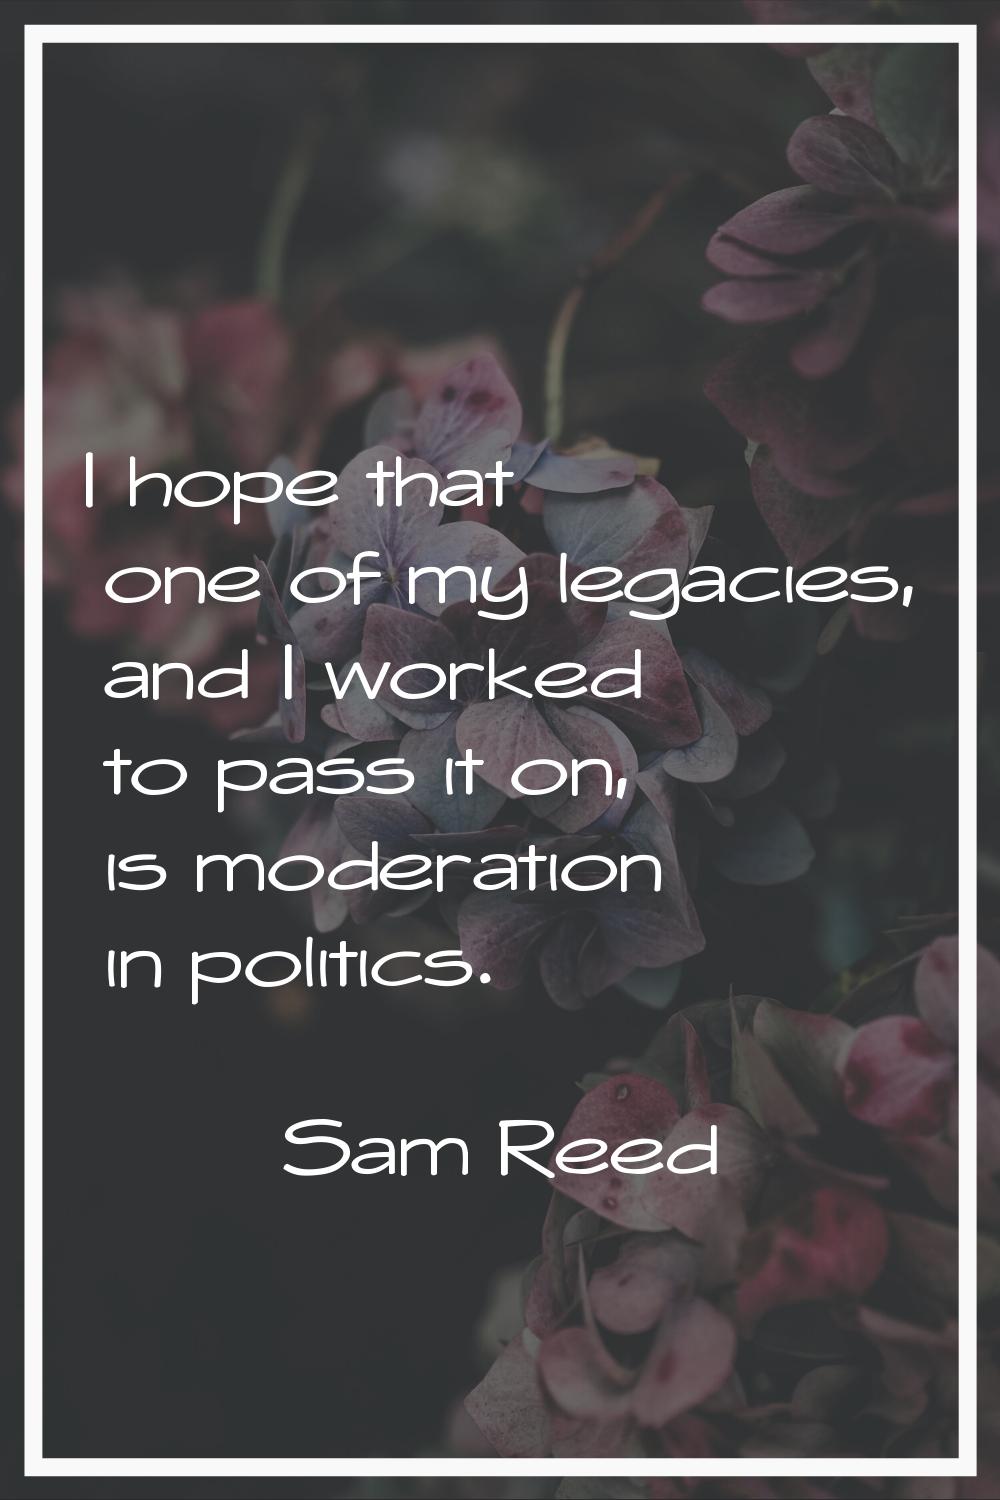 I hope that one of my legacies, and I worked to pass it on, is moderation in politics.